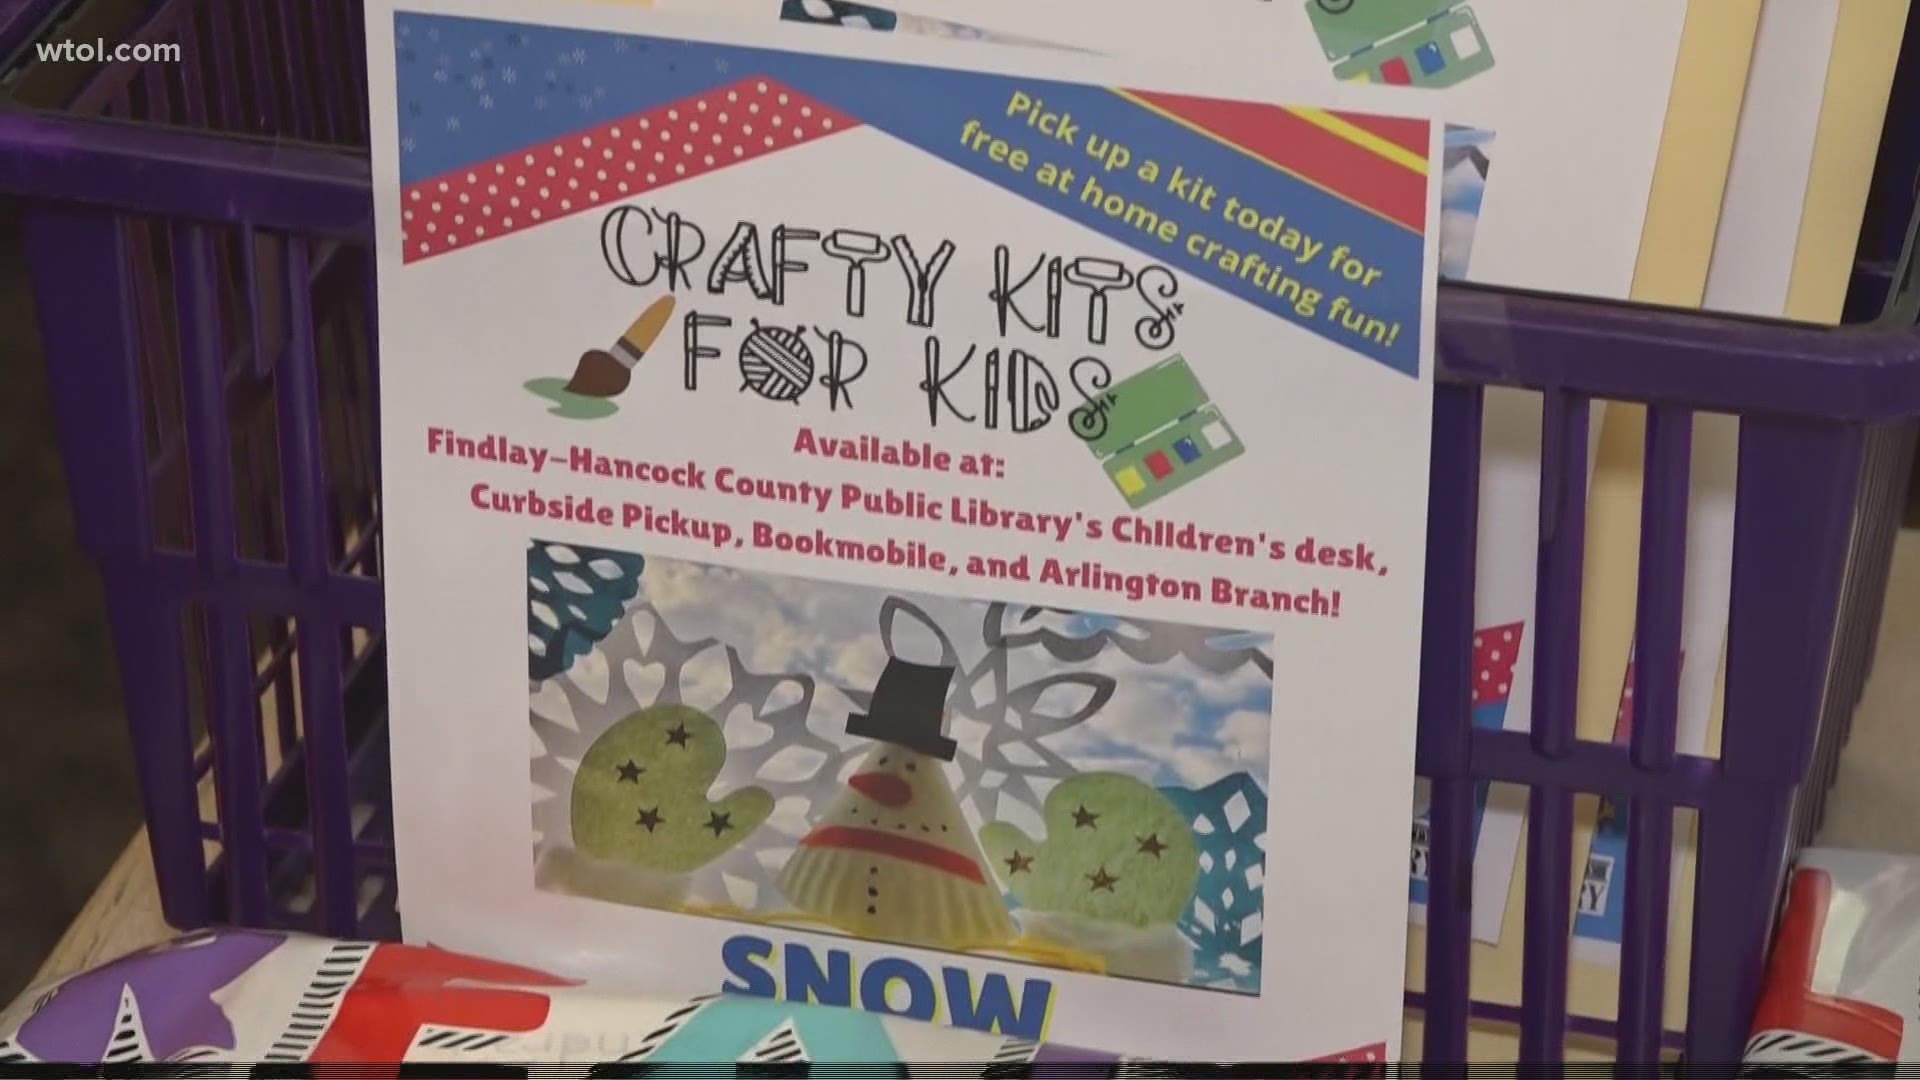 The kits are available at the Findlay-Hancock County Public Library every month.